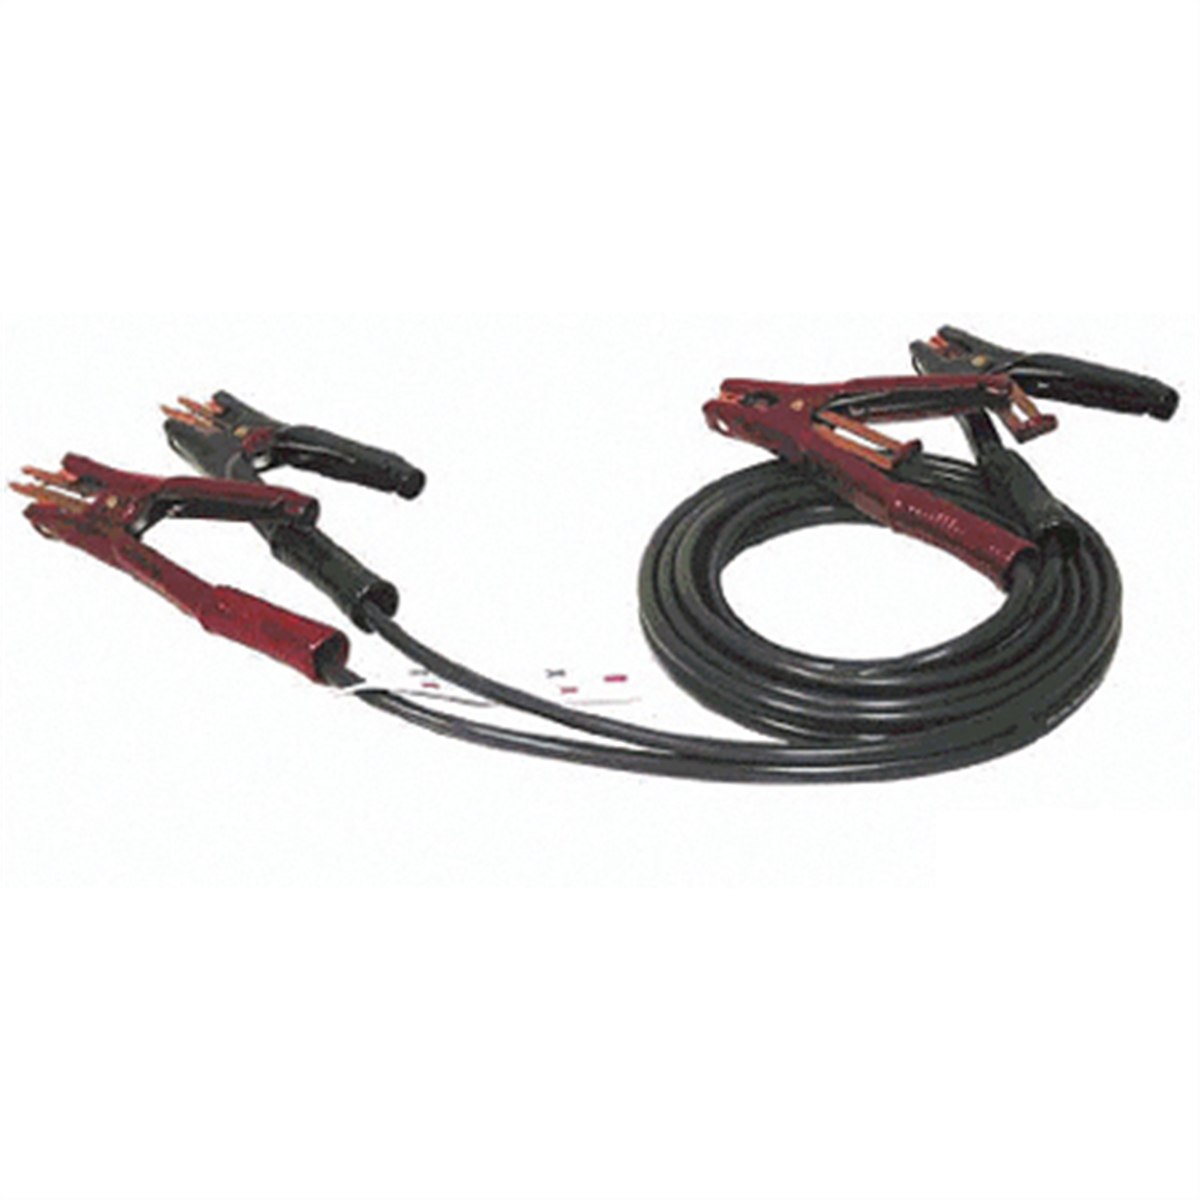 BOOSTER CABLE 12' 400A 5 AWG